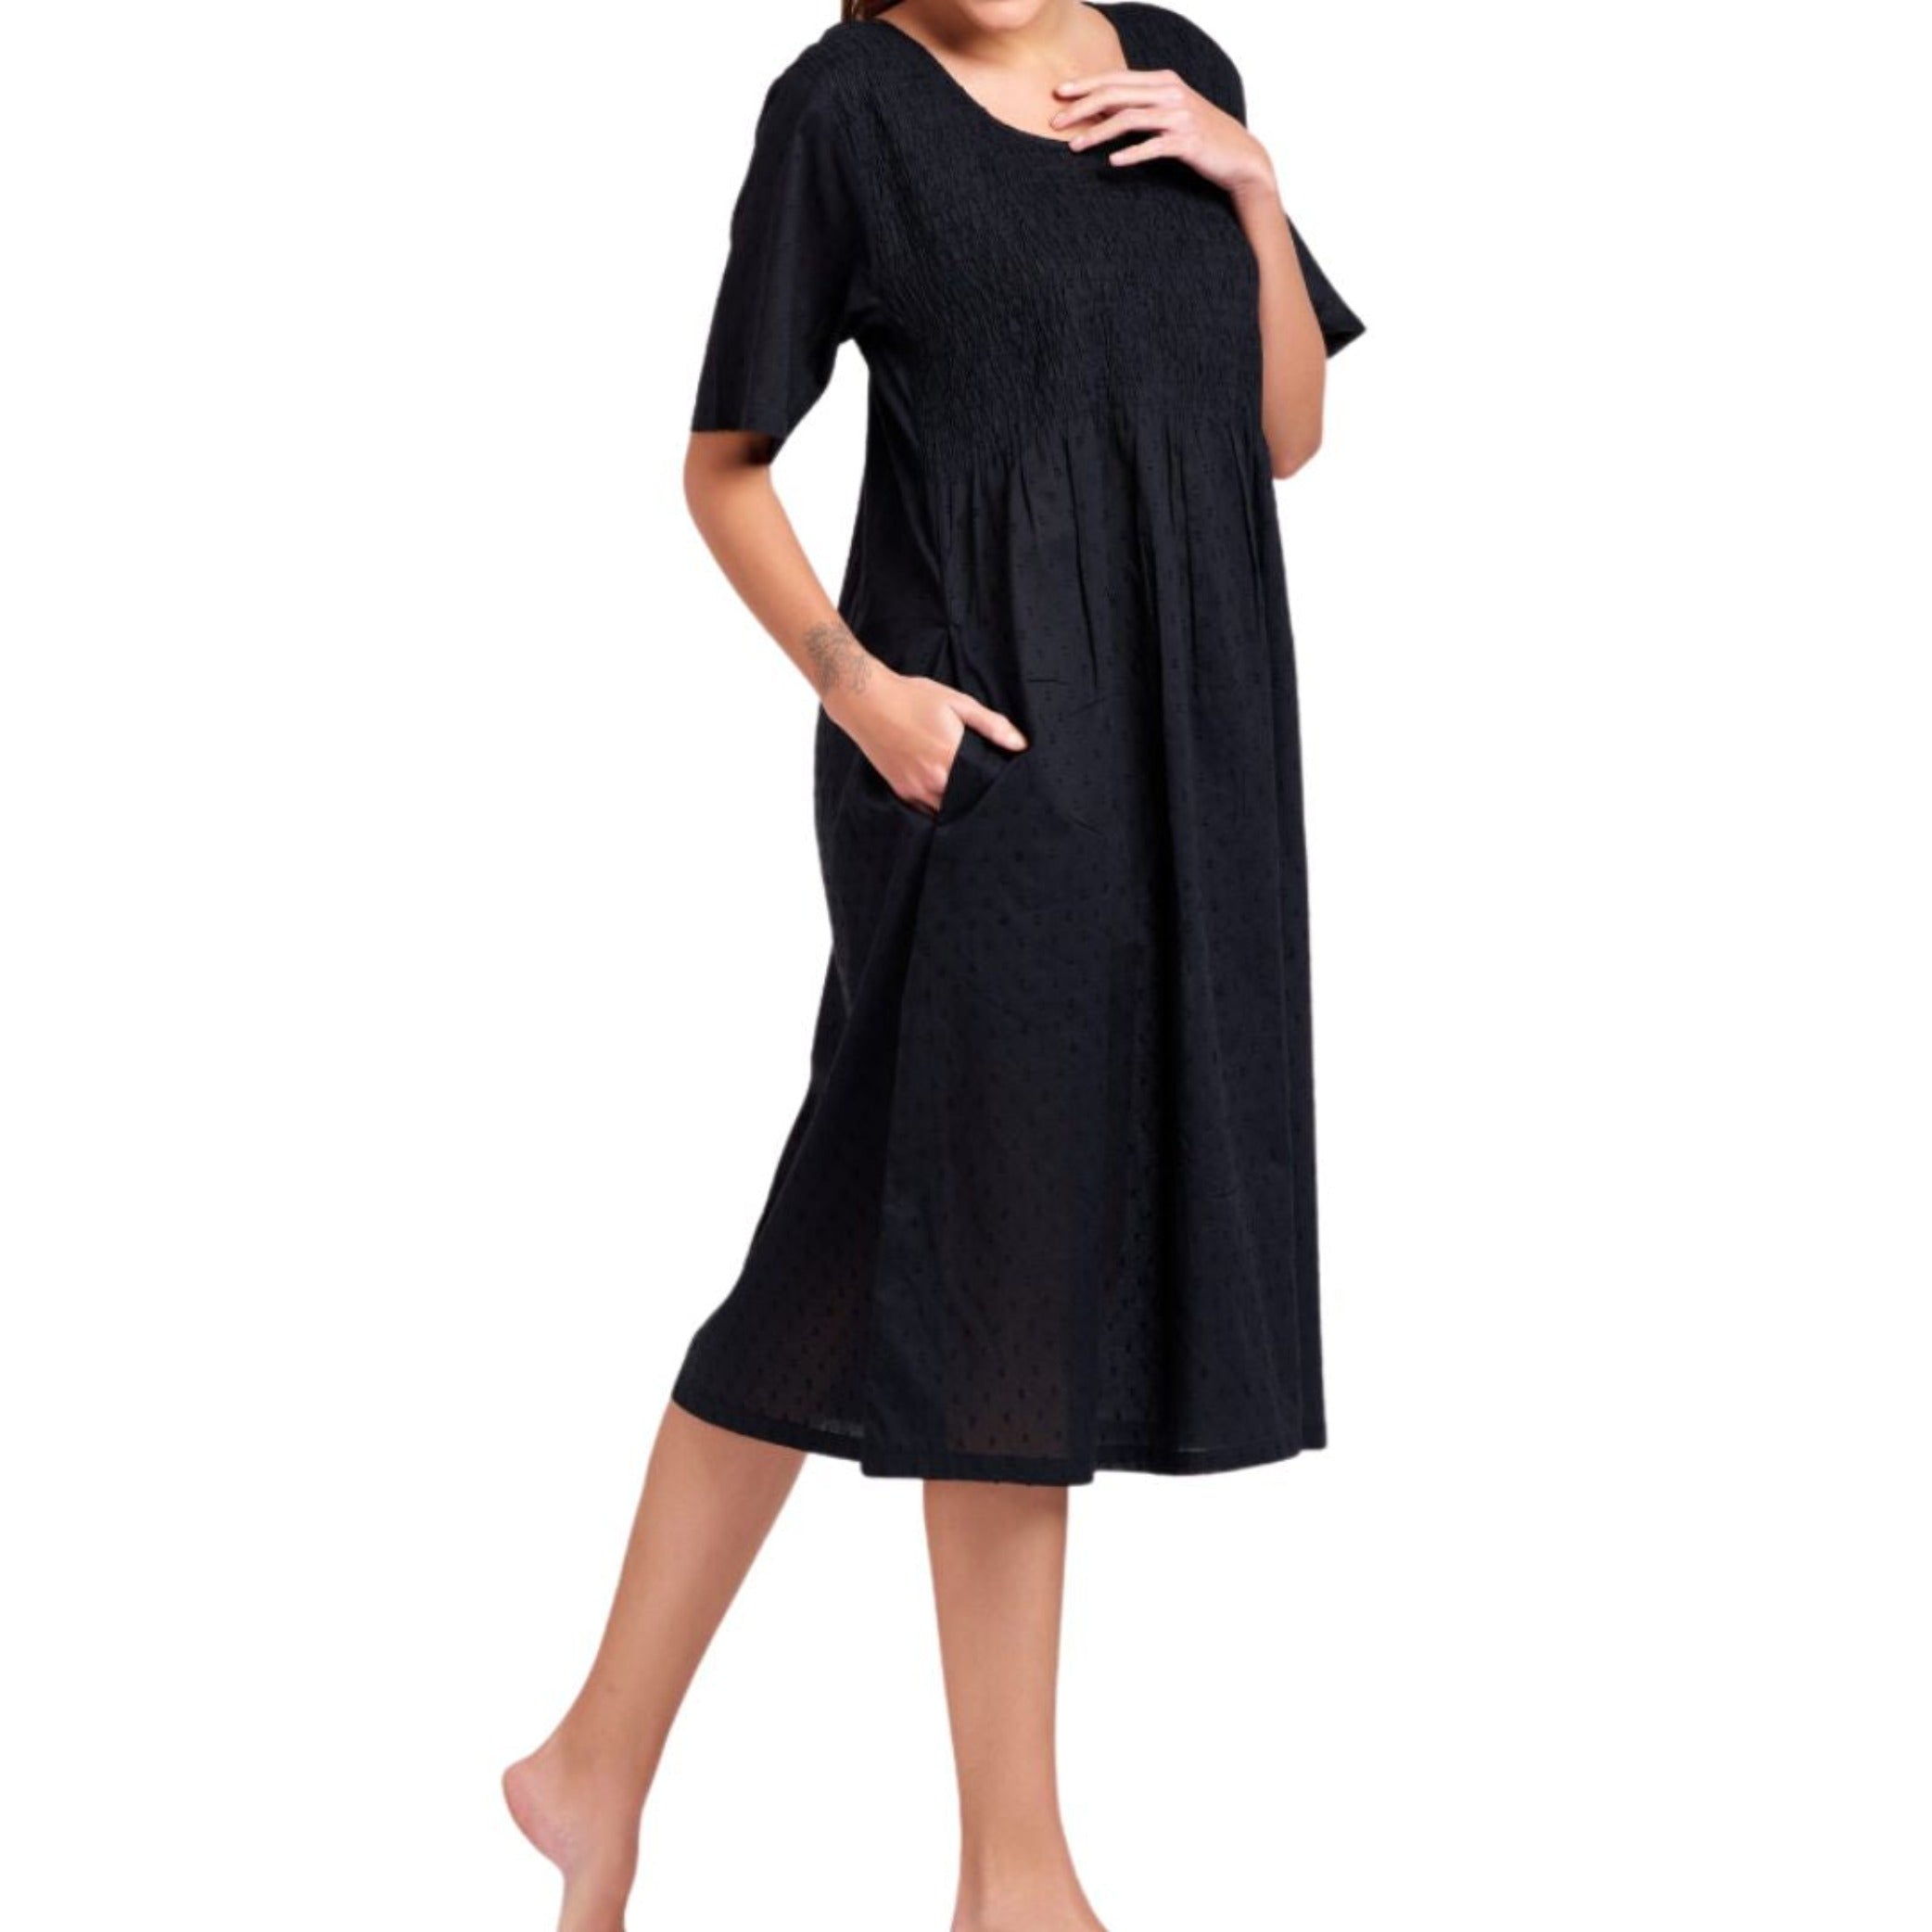 black cotton pjs on model with white background